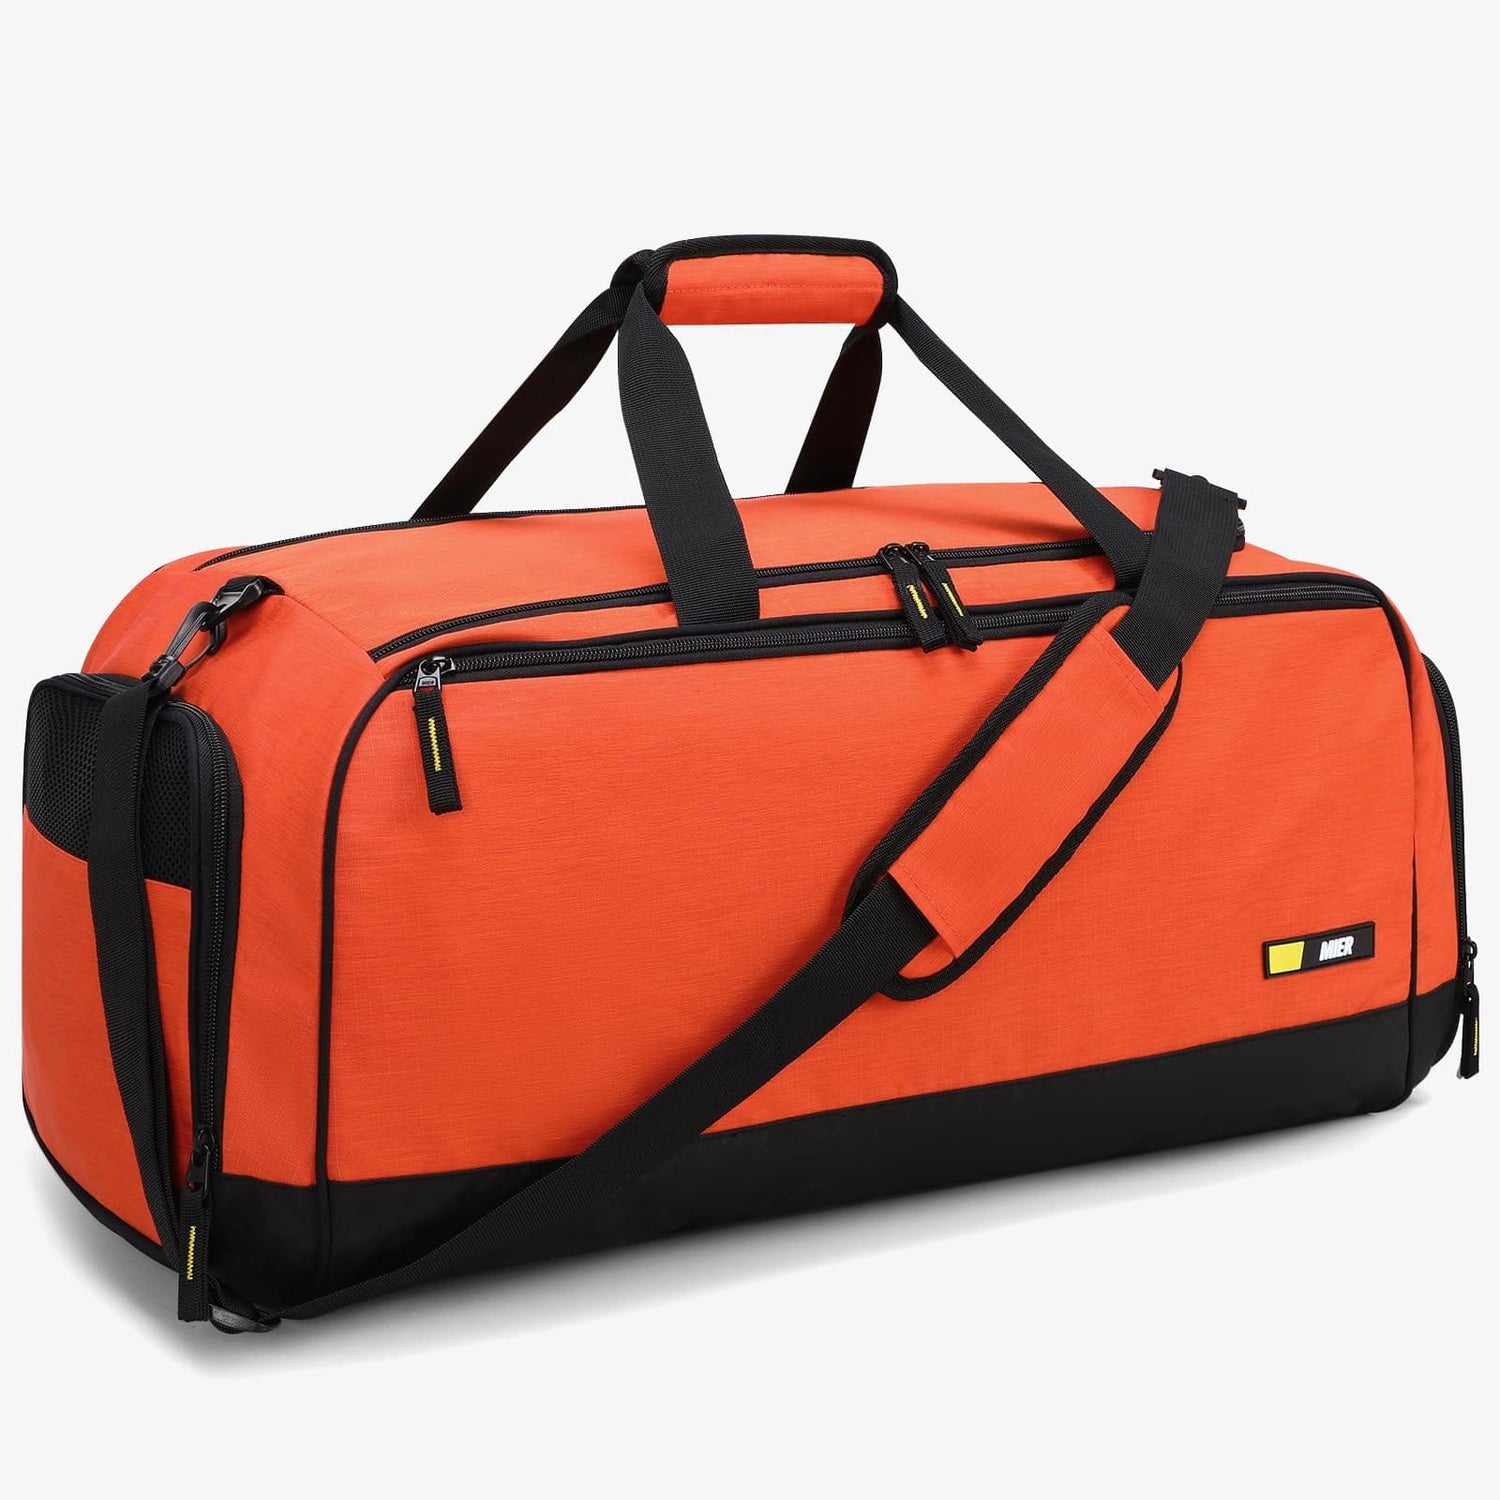 Large Gym Duffle Bags for Men with Shoe Compartment Gym Duffel Bag Orange MIER